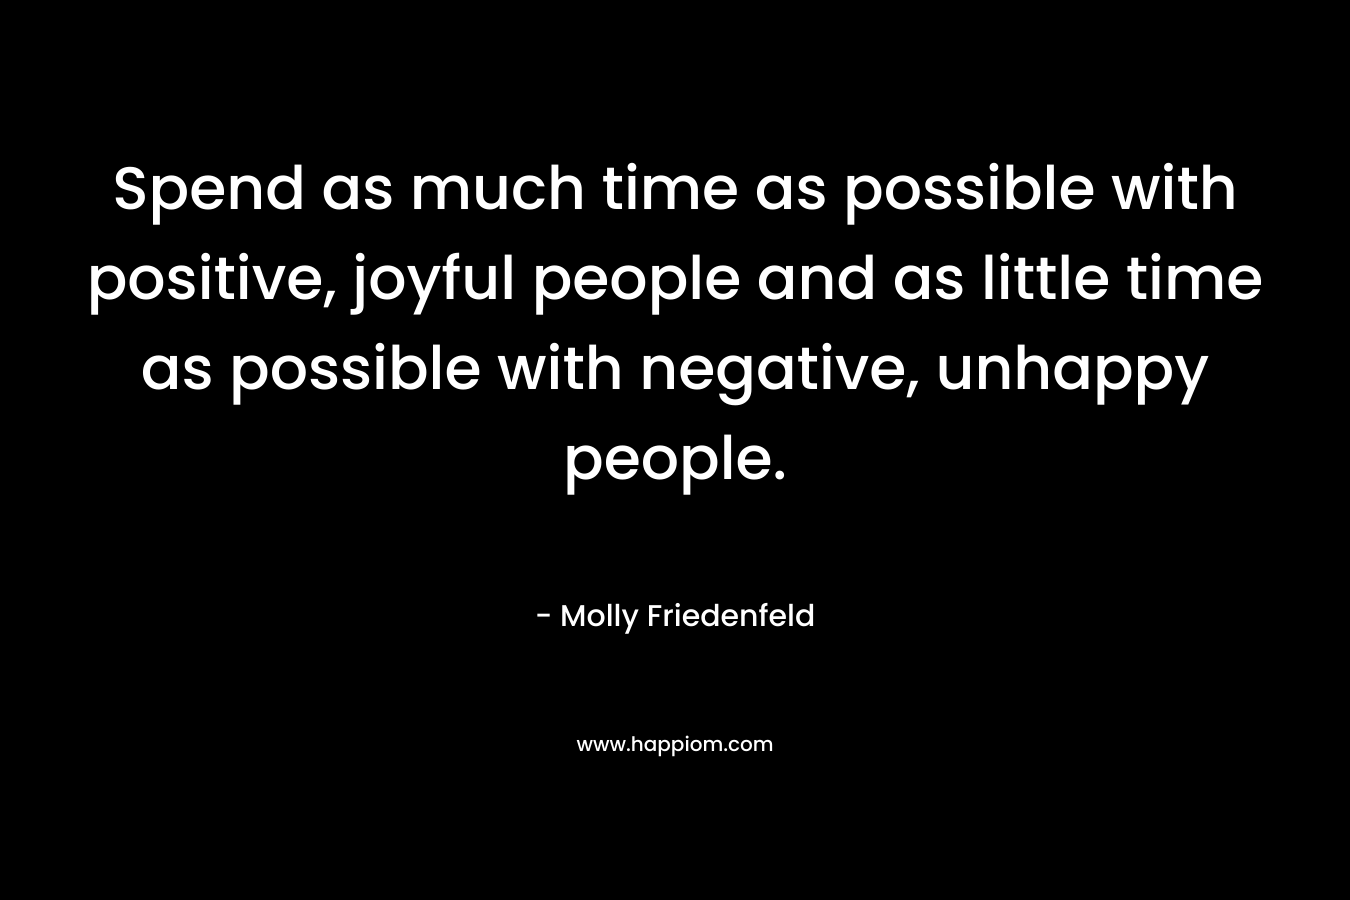 Spend as much time as possible with positive, joyful people and as little time as possible with negative, unhappy people.